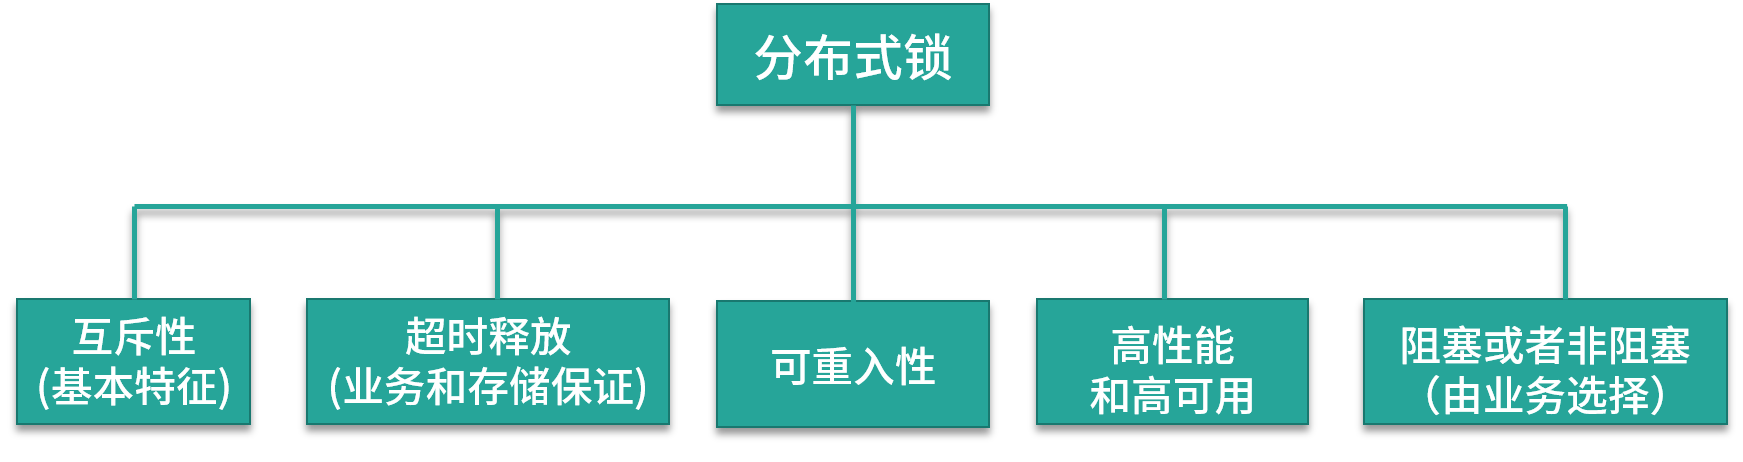 <span style='color:red;'>如何</span>使用 <span style='color:red;'>Redis</span> 快速实现分布式<span style='color:red;'>锁</span>？